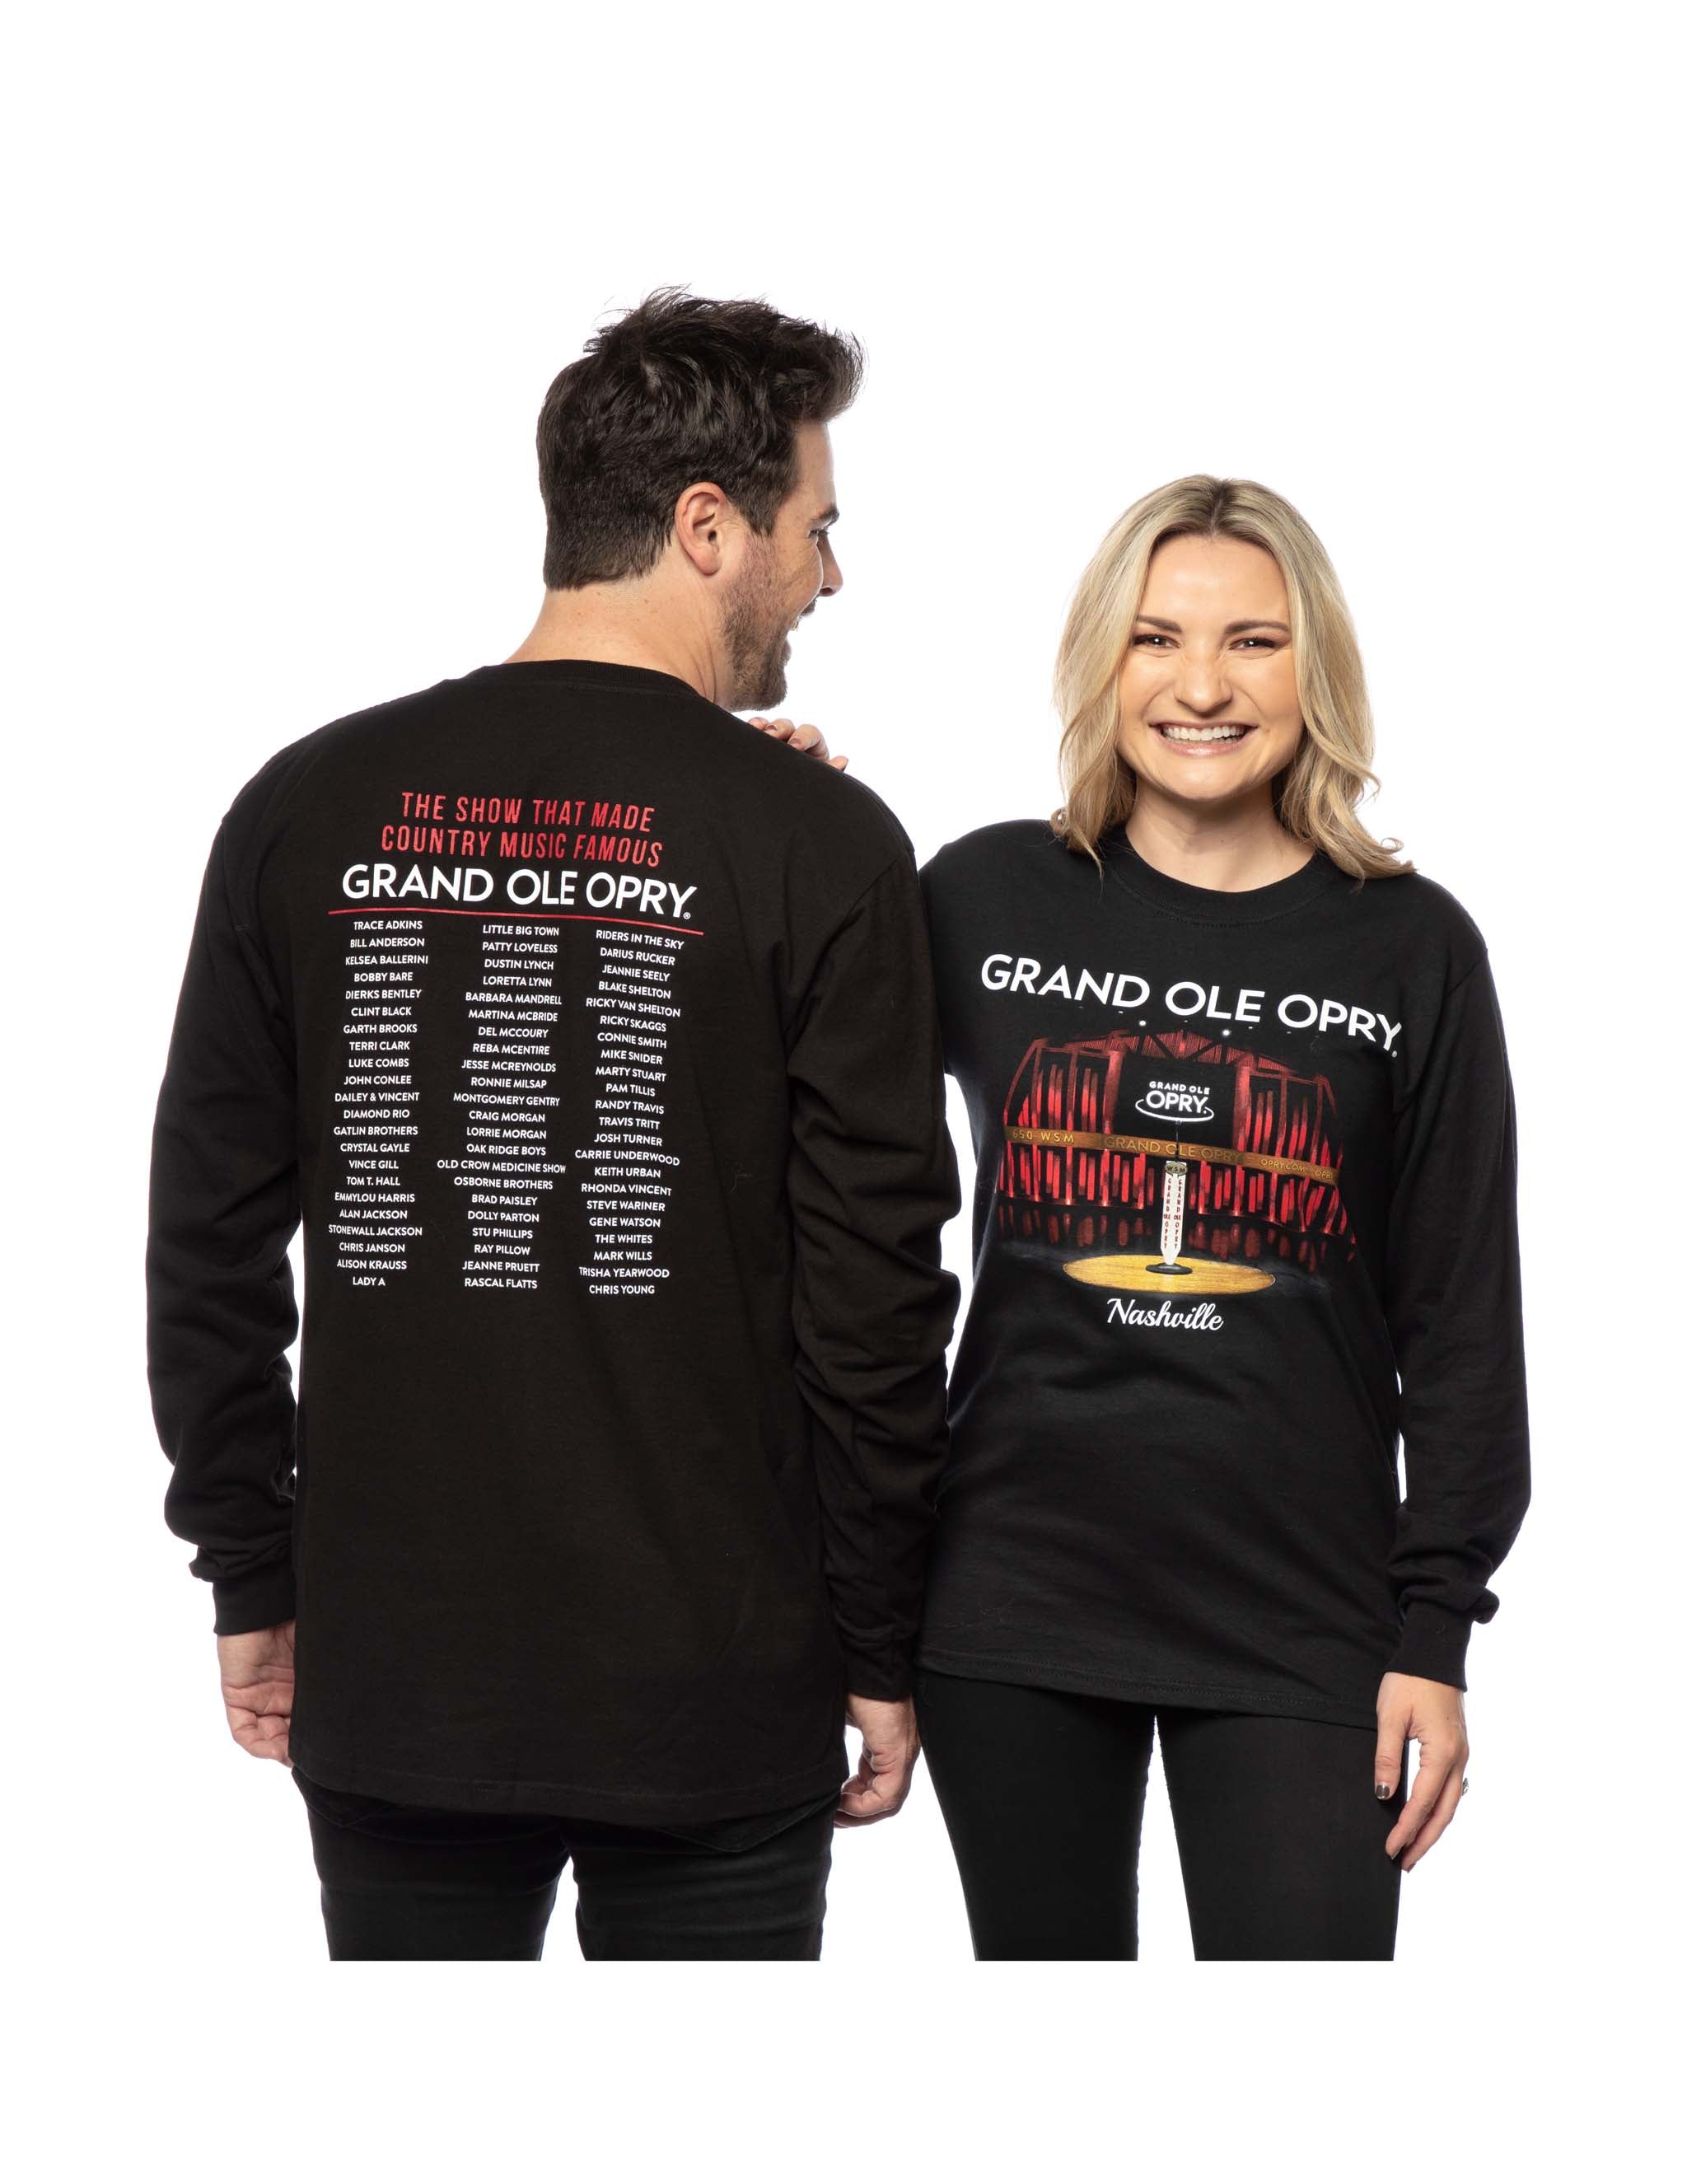 Opry Official Member Stage Long Sleeve T-Shirt